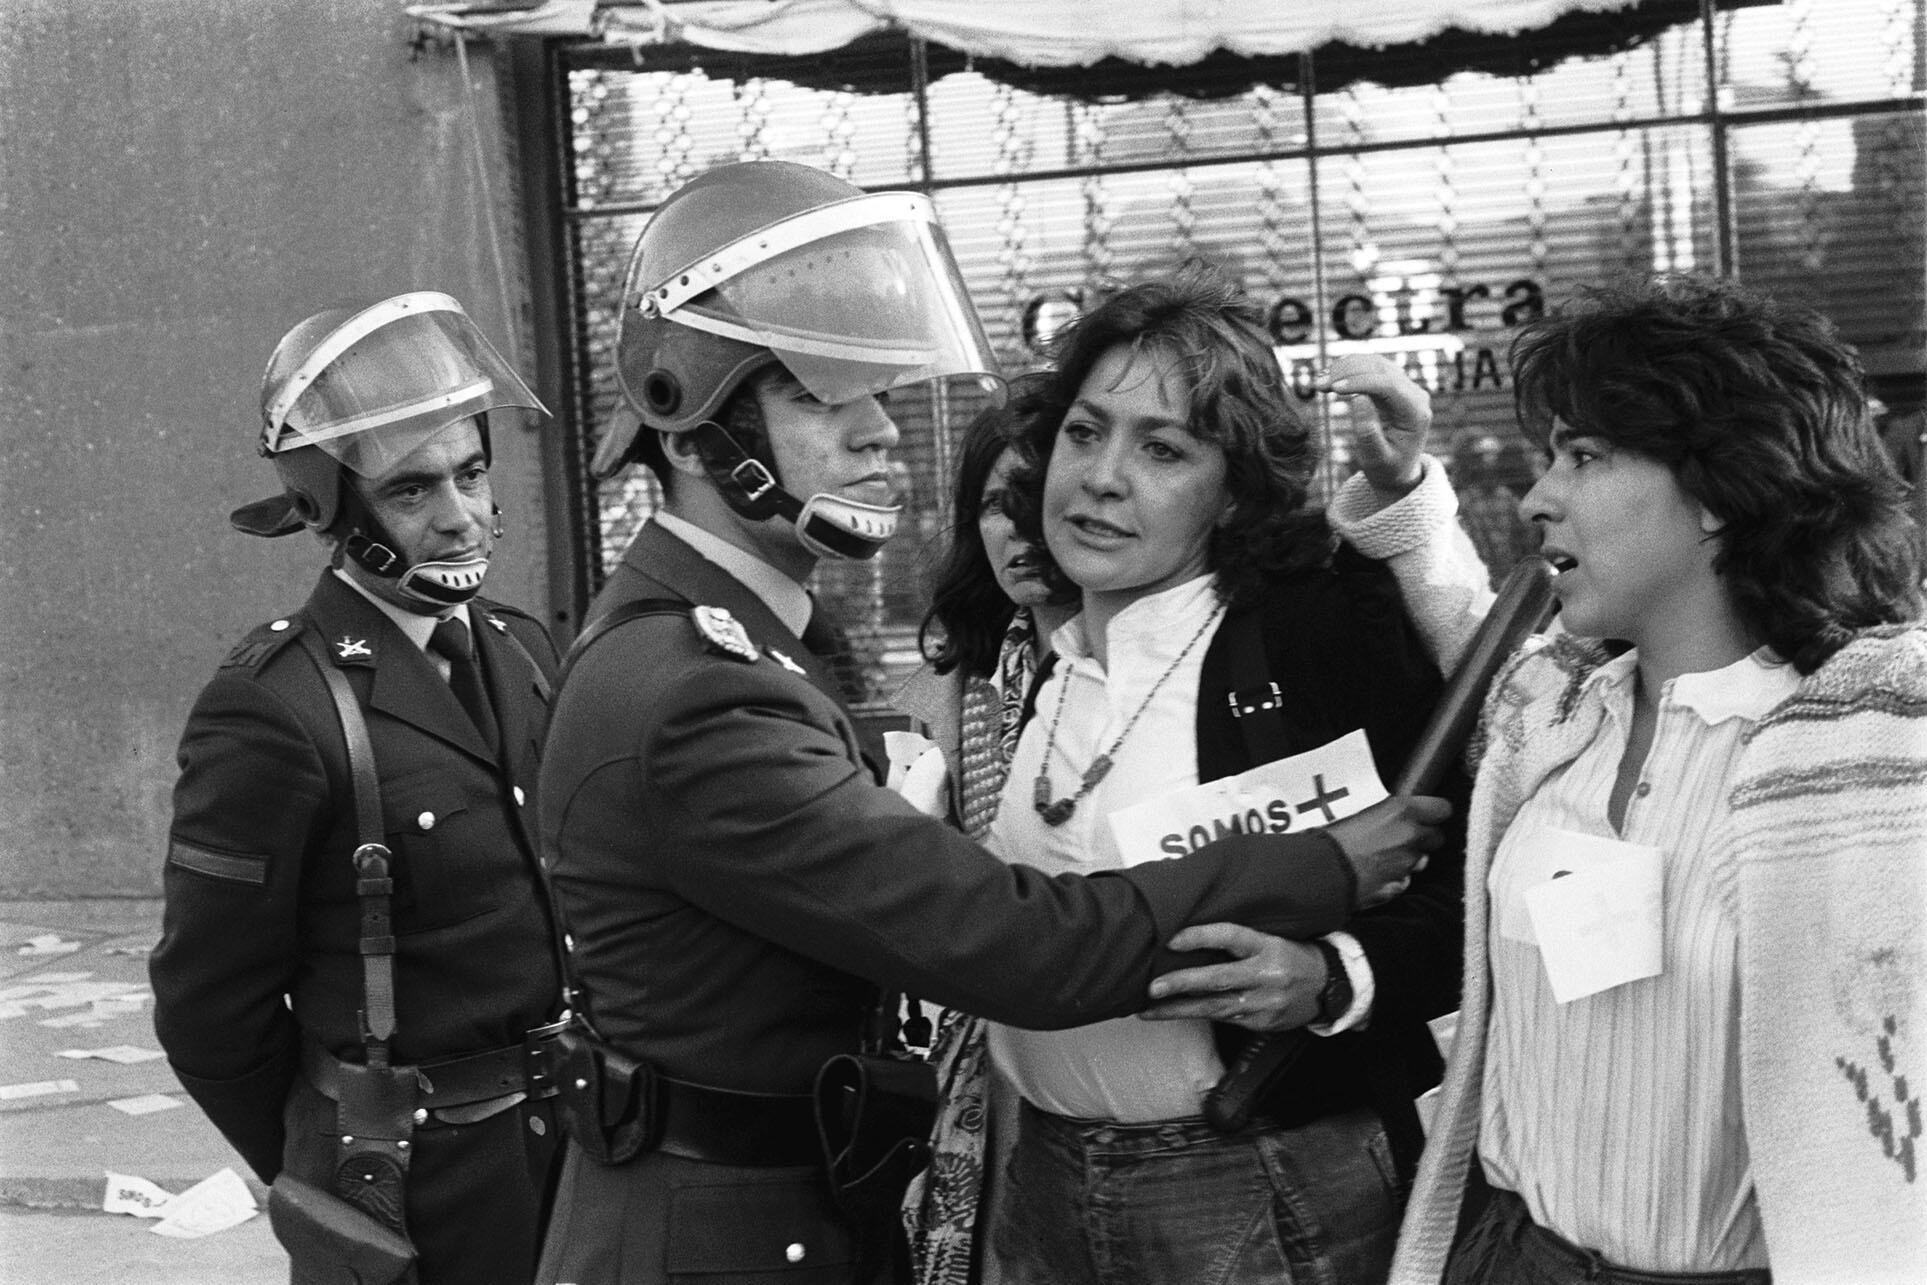 Mónica González Mujica (center) at a women’s march in Chile, 1986. (Photo by Juan Carlos Cáceres.)